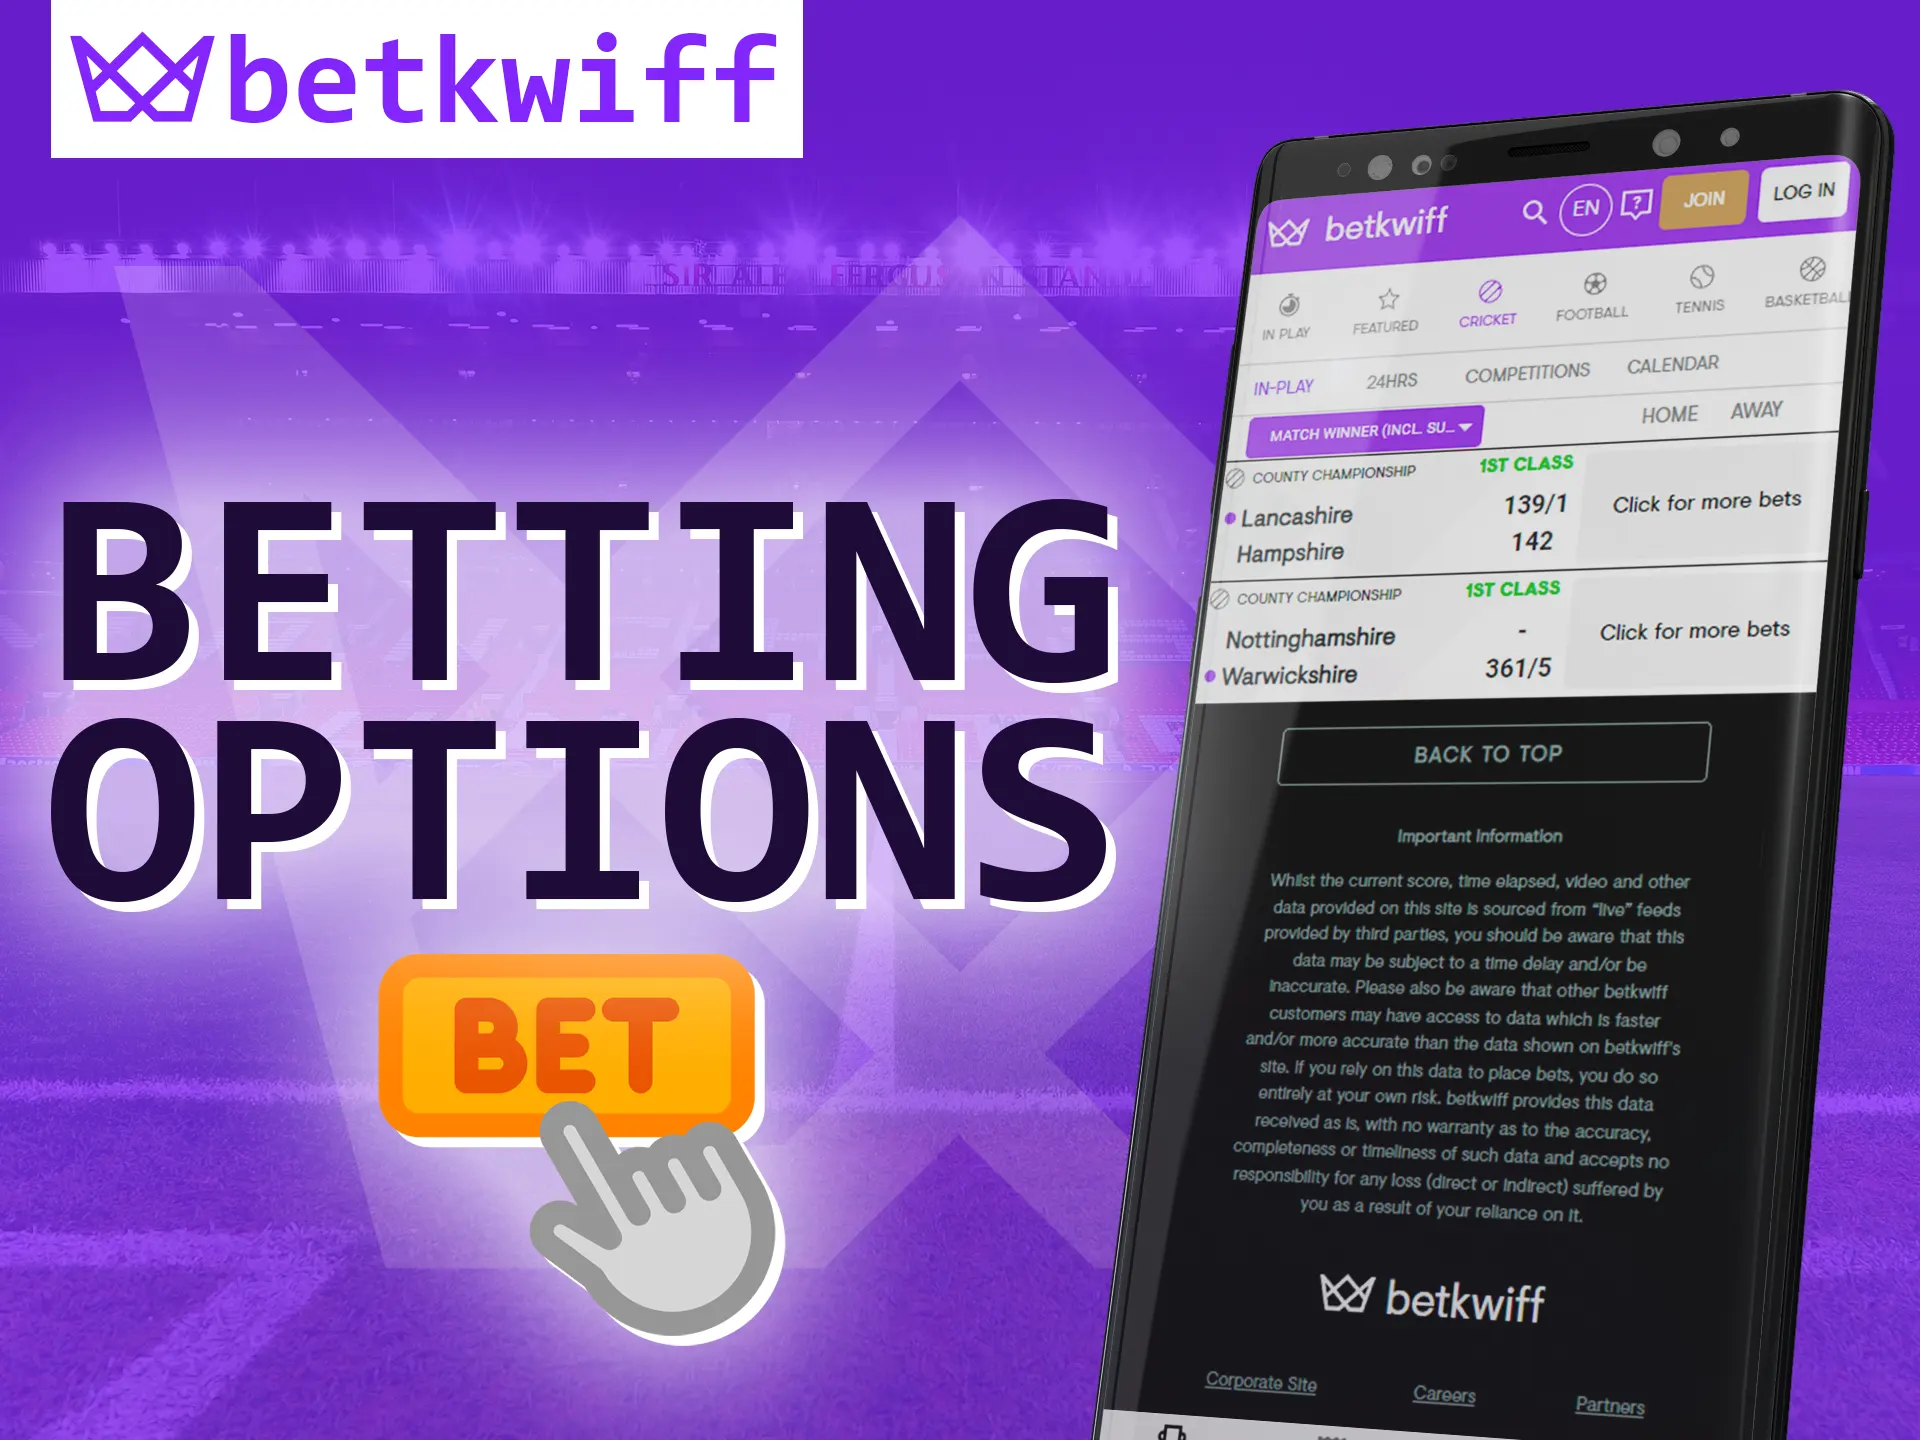 In the Betkwiff app you have different options for betting, try different ones.